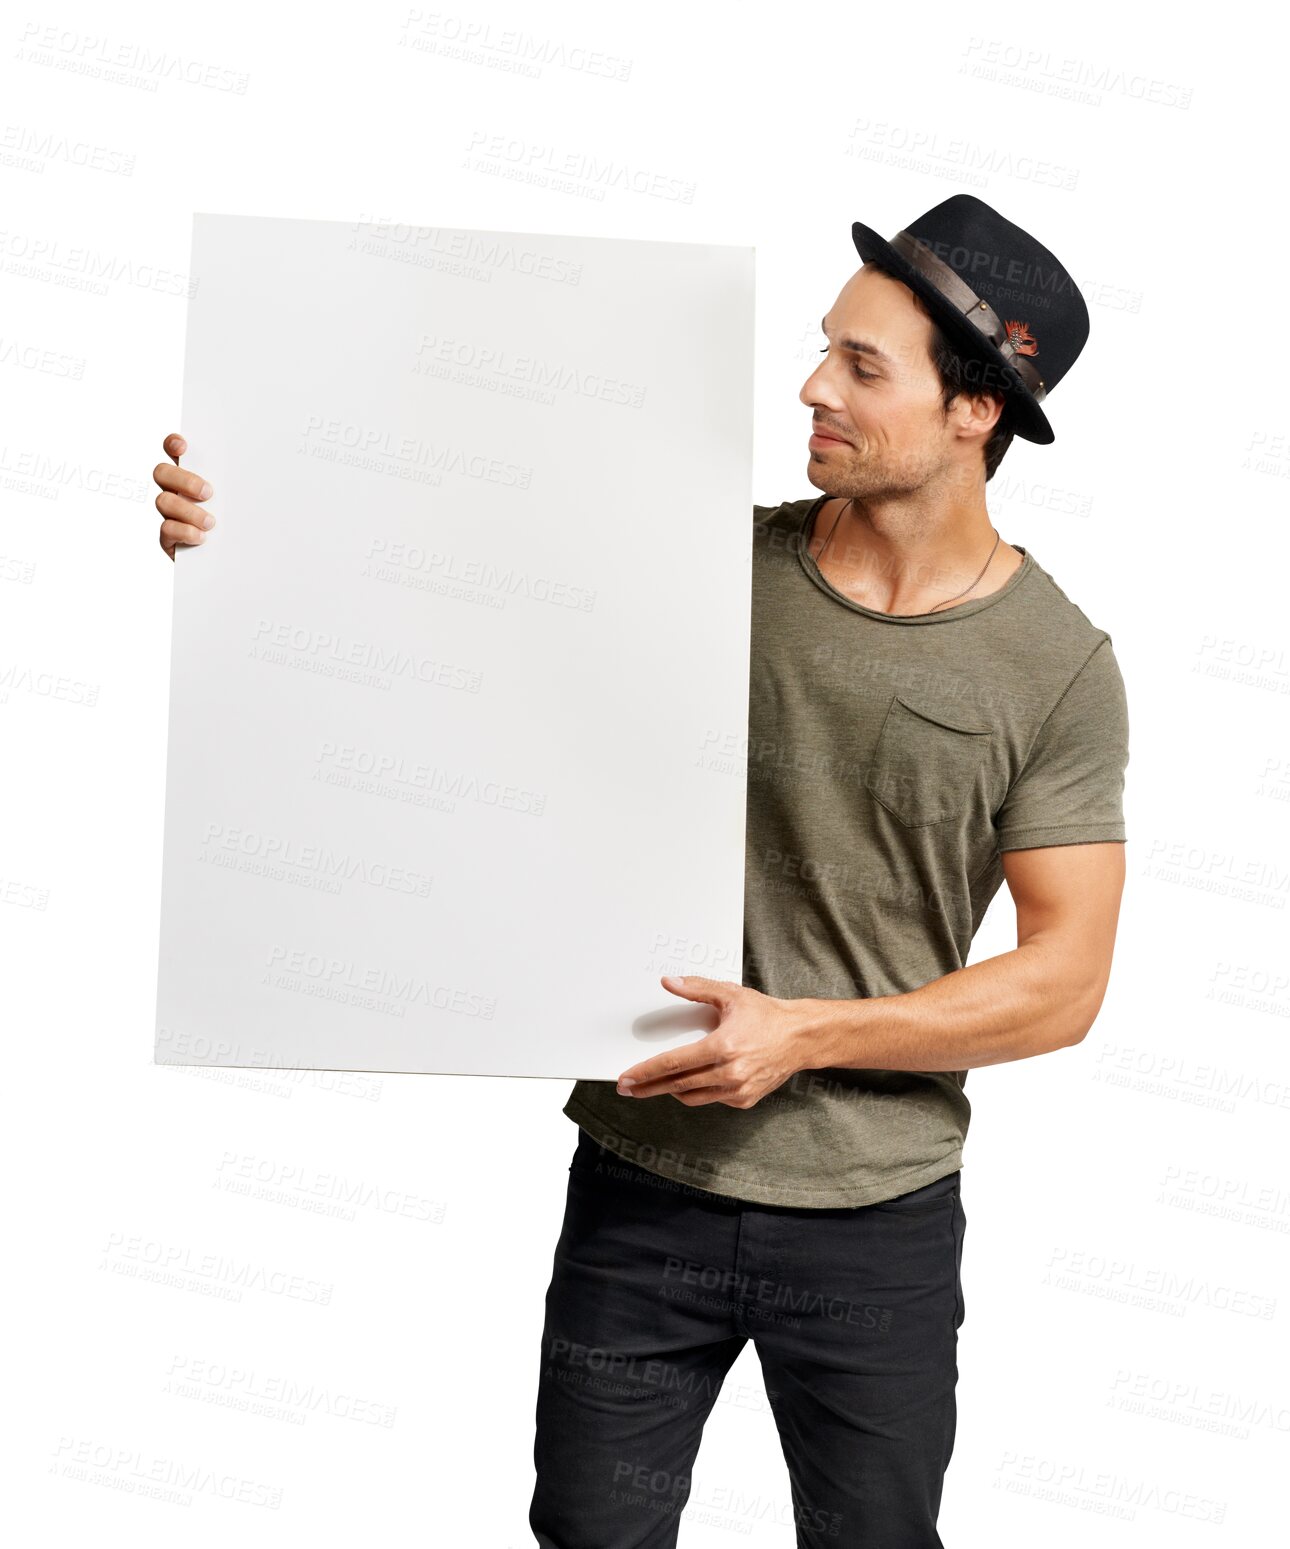 Buy stock photo Young man, billboard and standing for advertising or marketing isolated on a transparent PNG background. Male person or model in casual clothing with empty poster, sign or placard for advertisement